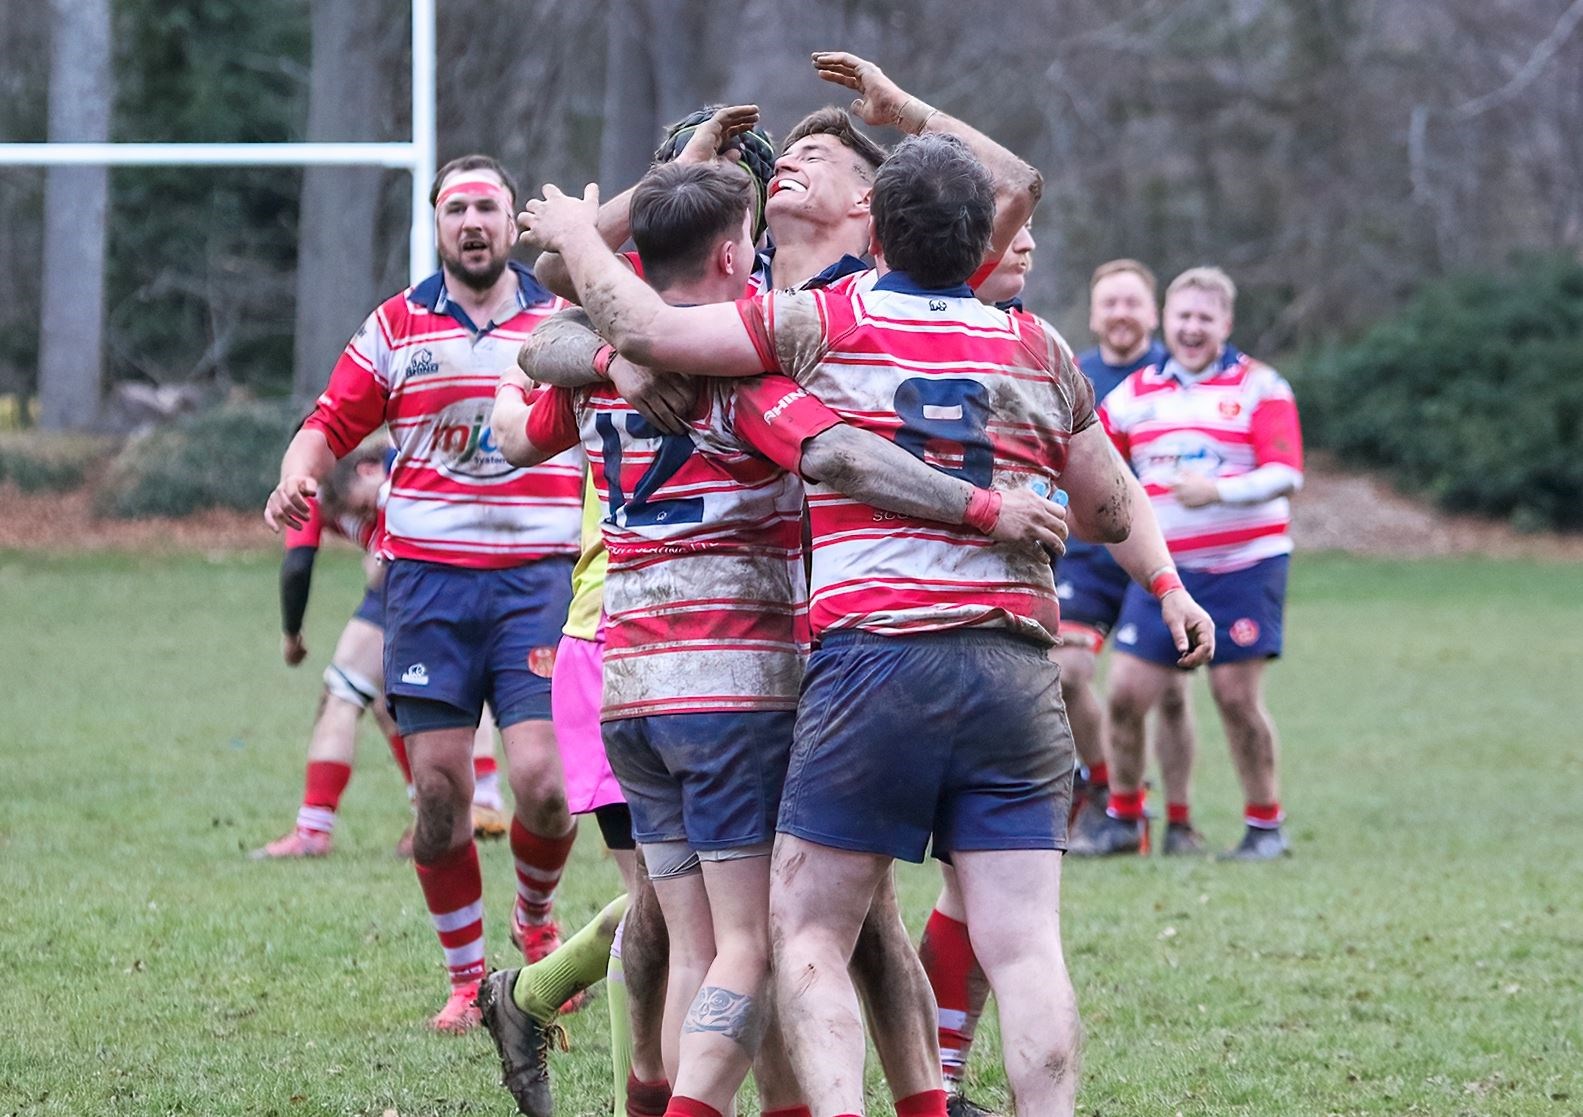 Rory Millar (centre) is mobbed after kicking the winning conversion against Ardrossan. Picture: John MacGregor